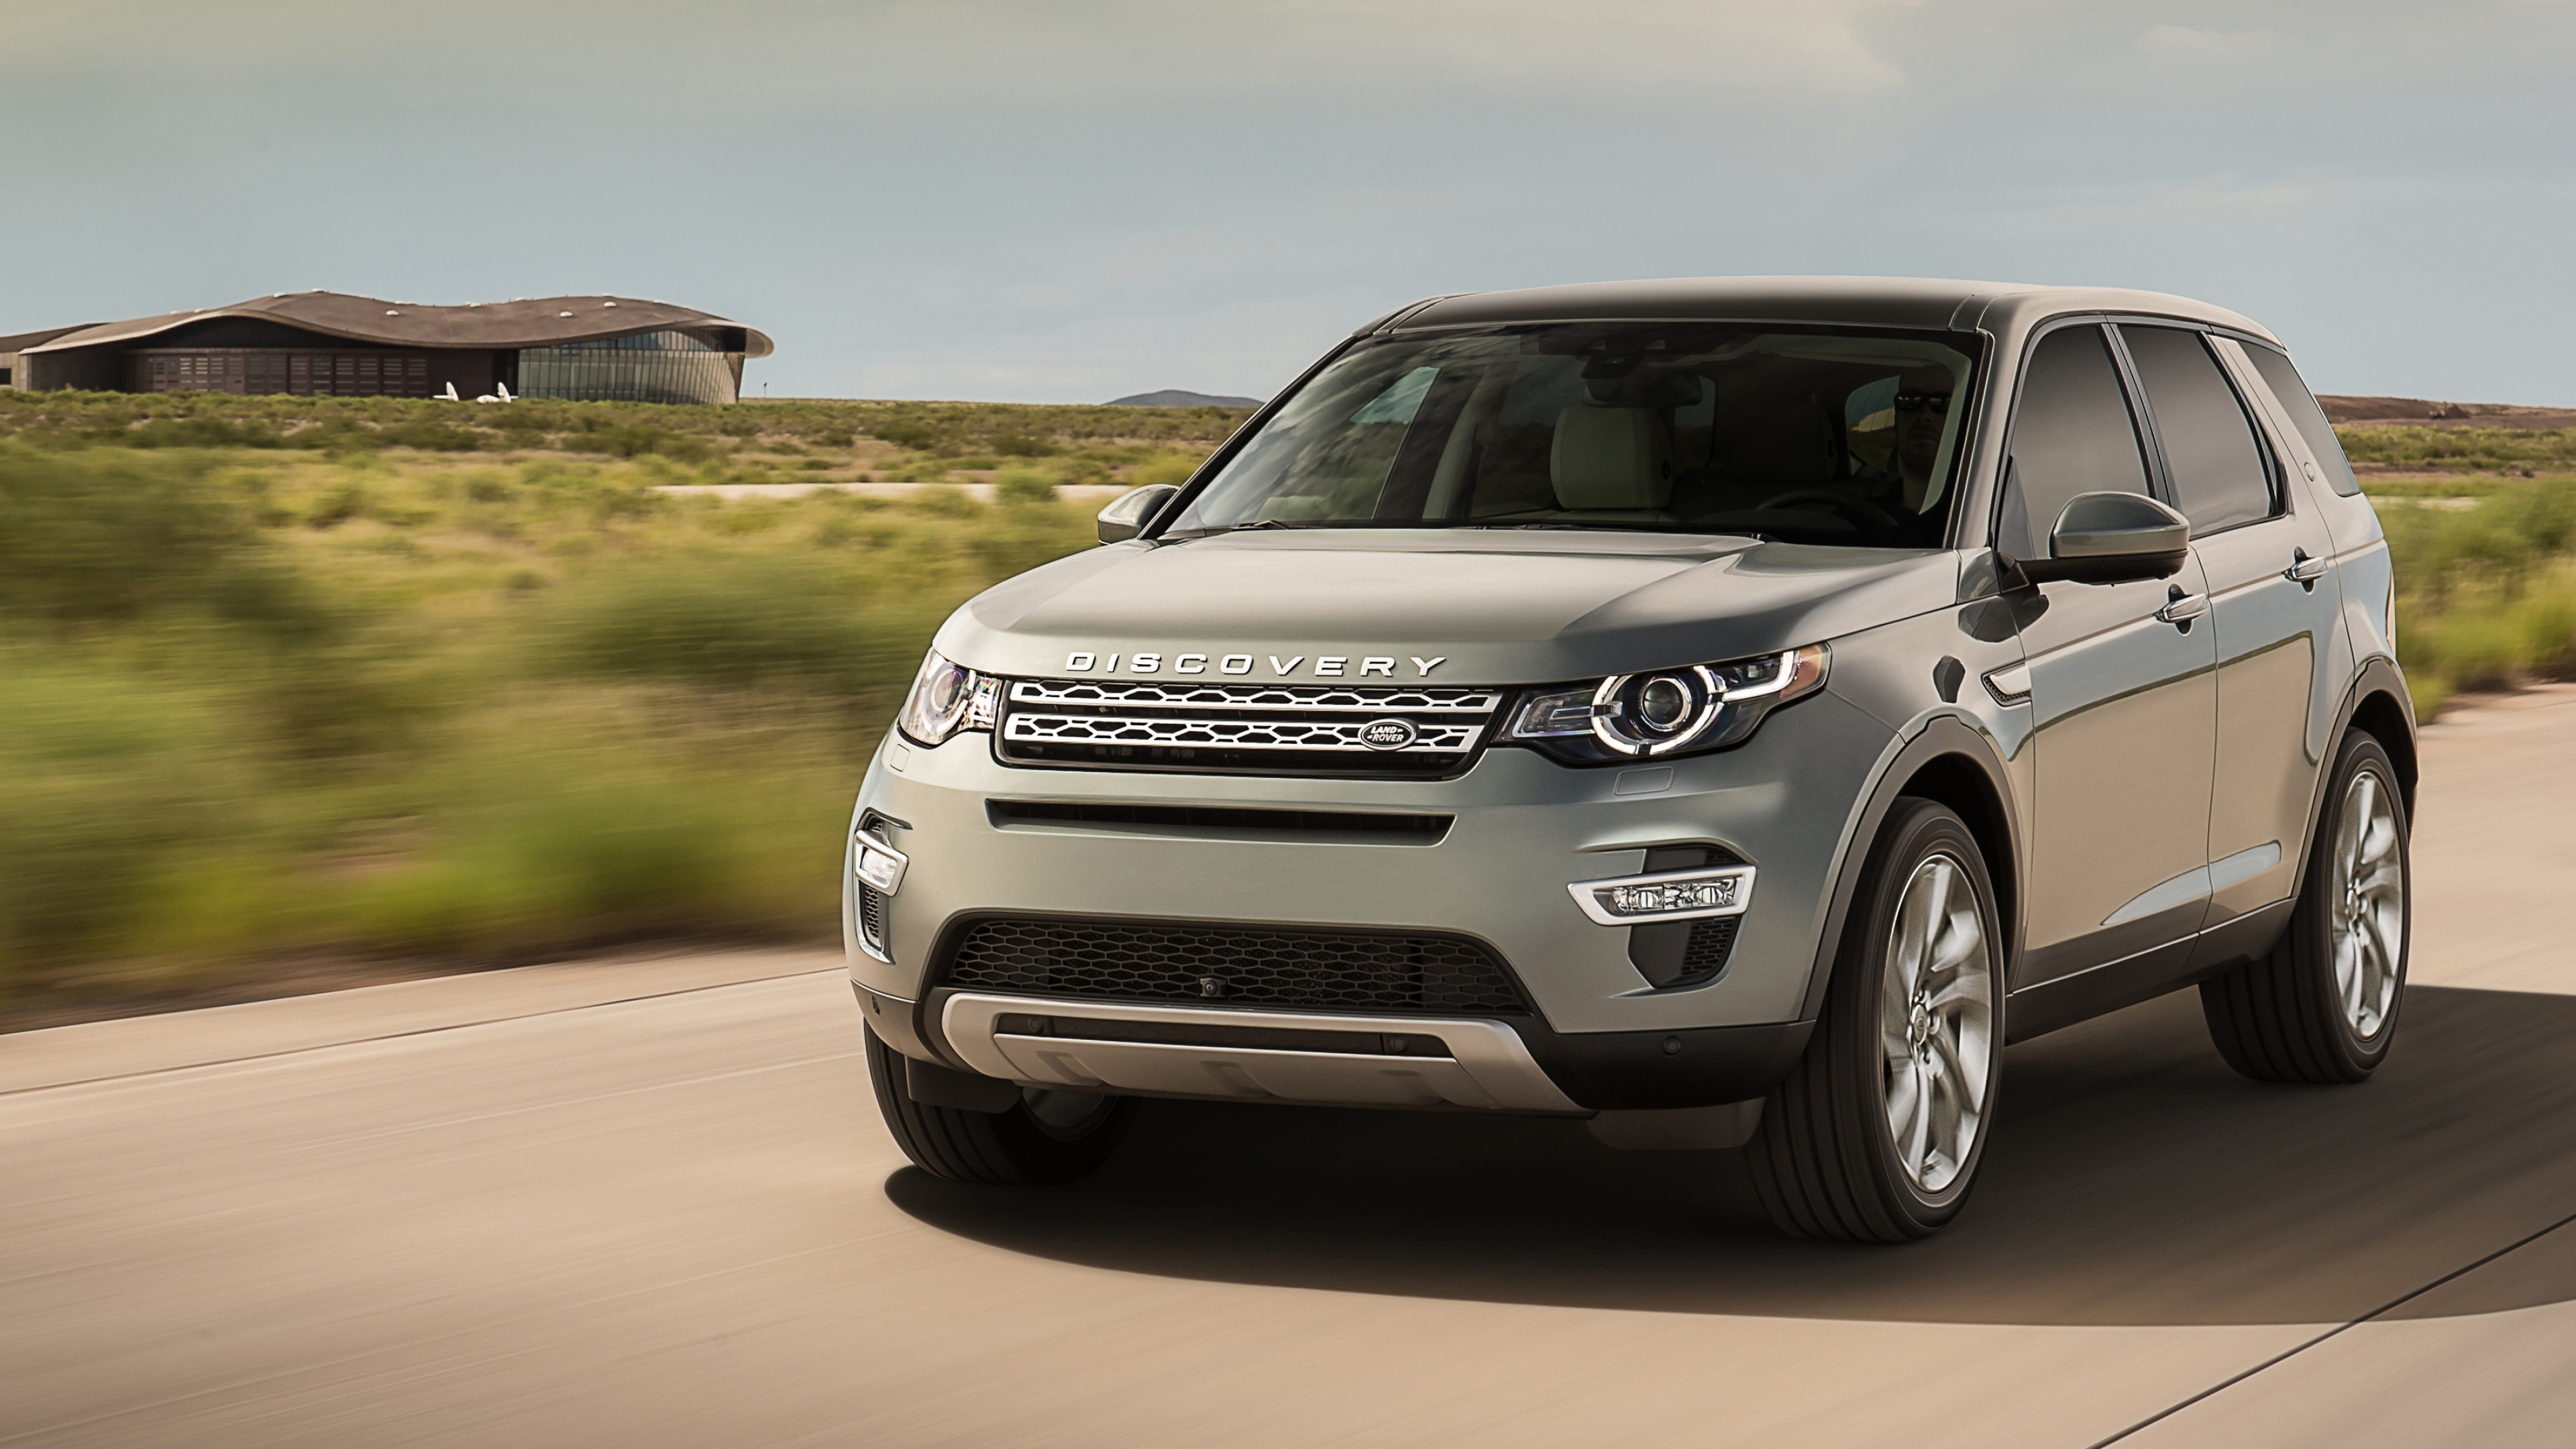 Land Rover Discovery, Adventure seeker, Off-road capability, Luxurious interior, 3840x2160 4K Desktop